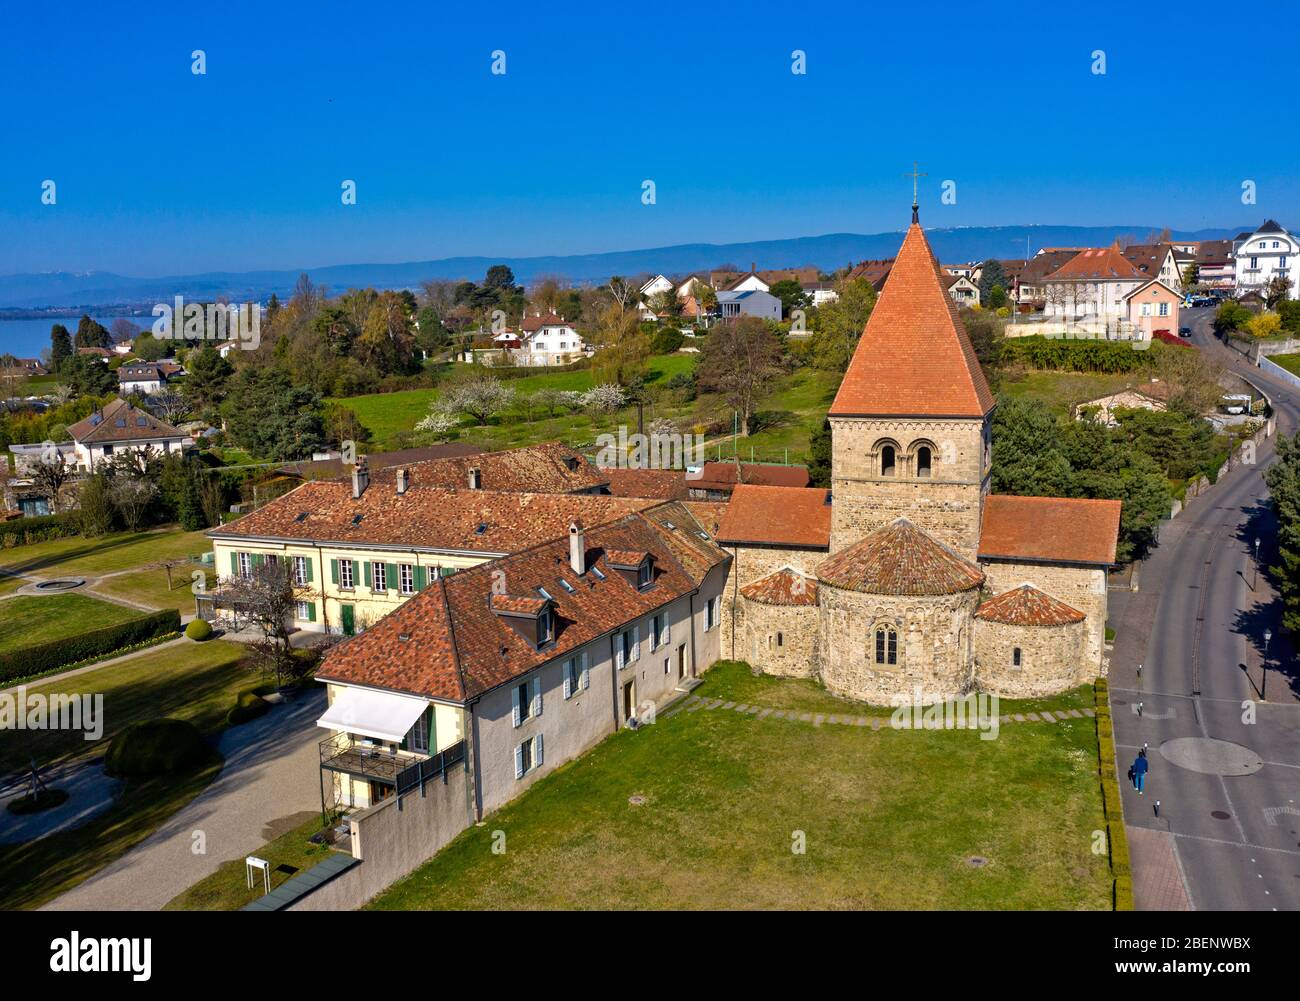 Romanesque church Saint-Sulpice with a triple apses, St-Sulpice, Canton of Vaud, Switzerland Stock Photo